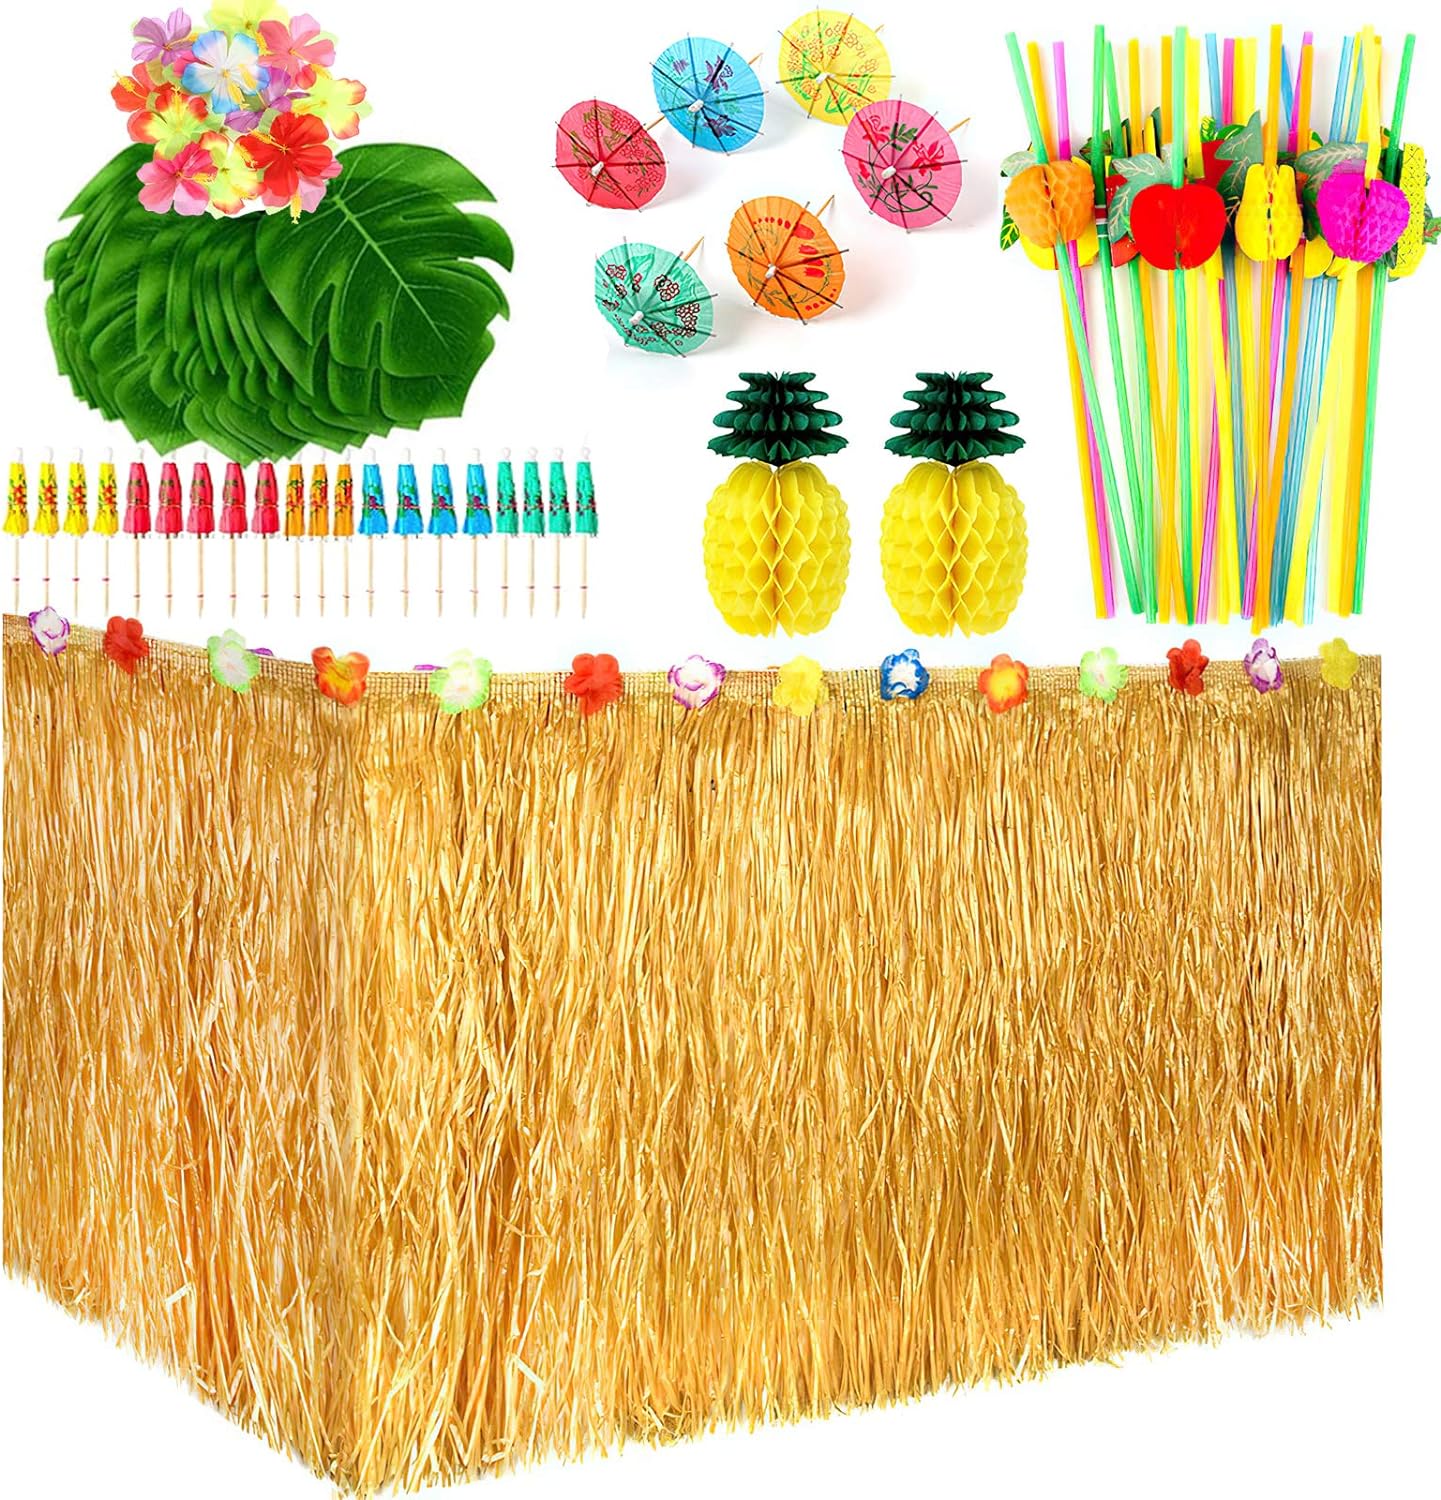 3 years and up Hawaiian Tropical Party Decoration Set with 9feet Hawaiian  Luau Grass Table Skirt, Hibiscus Flowers, Palm Leaves, Paper Pineapp